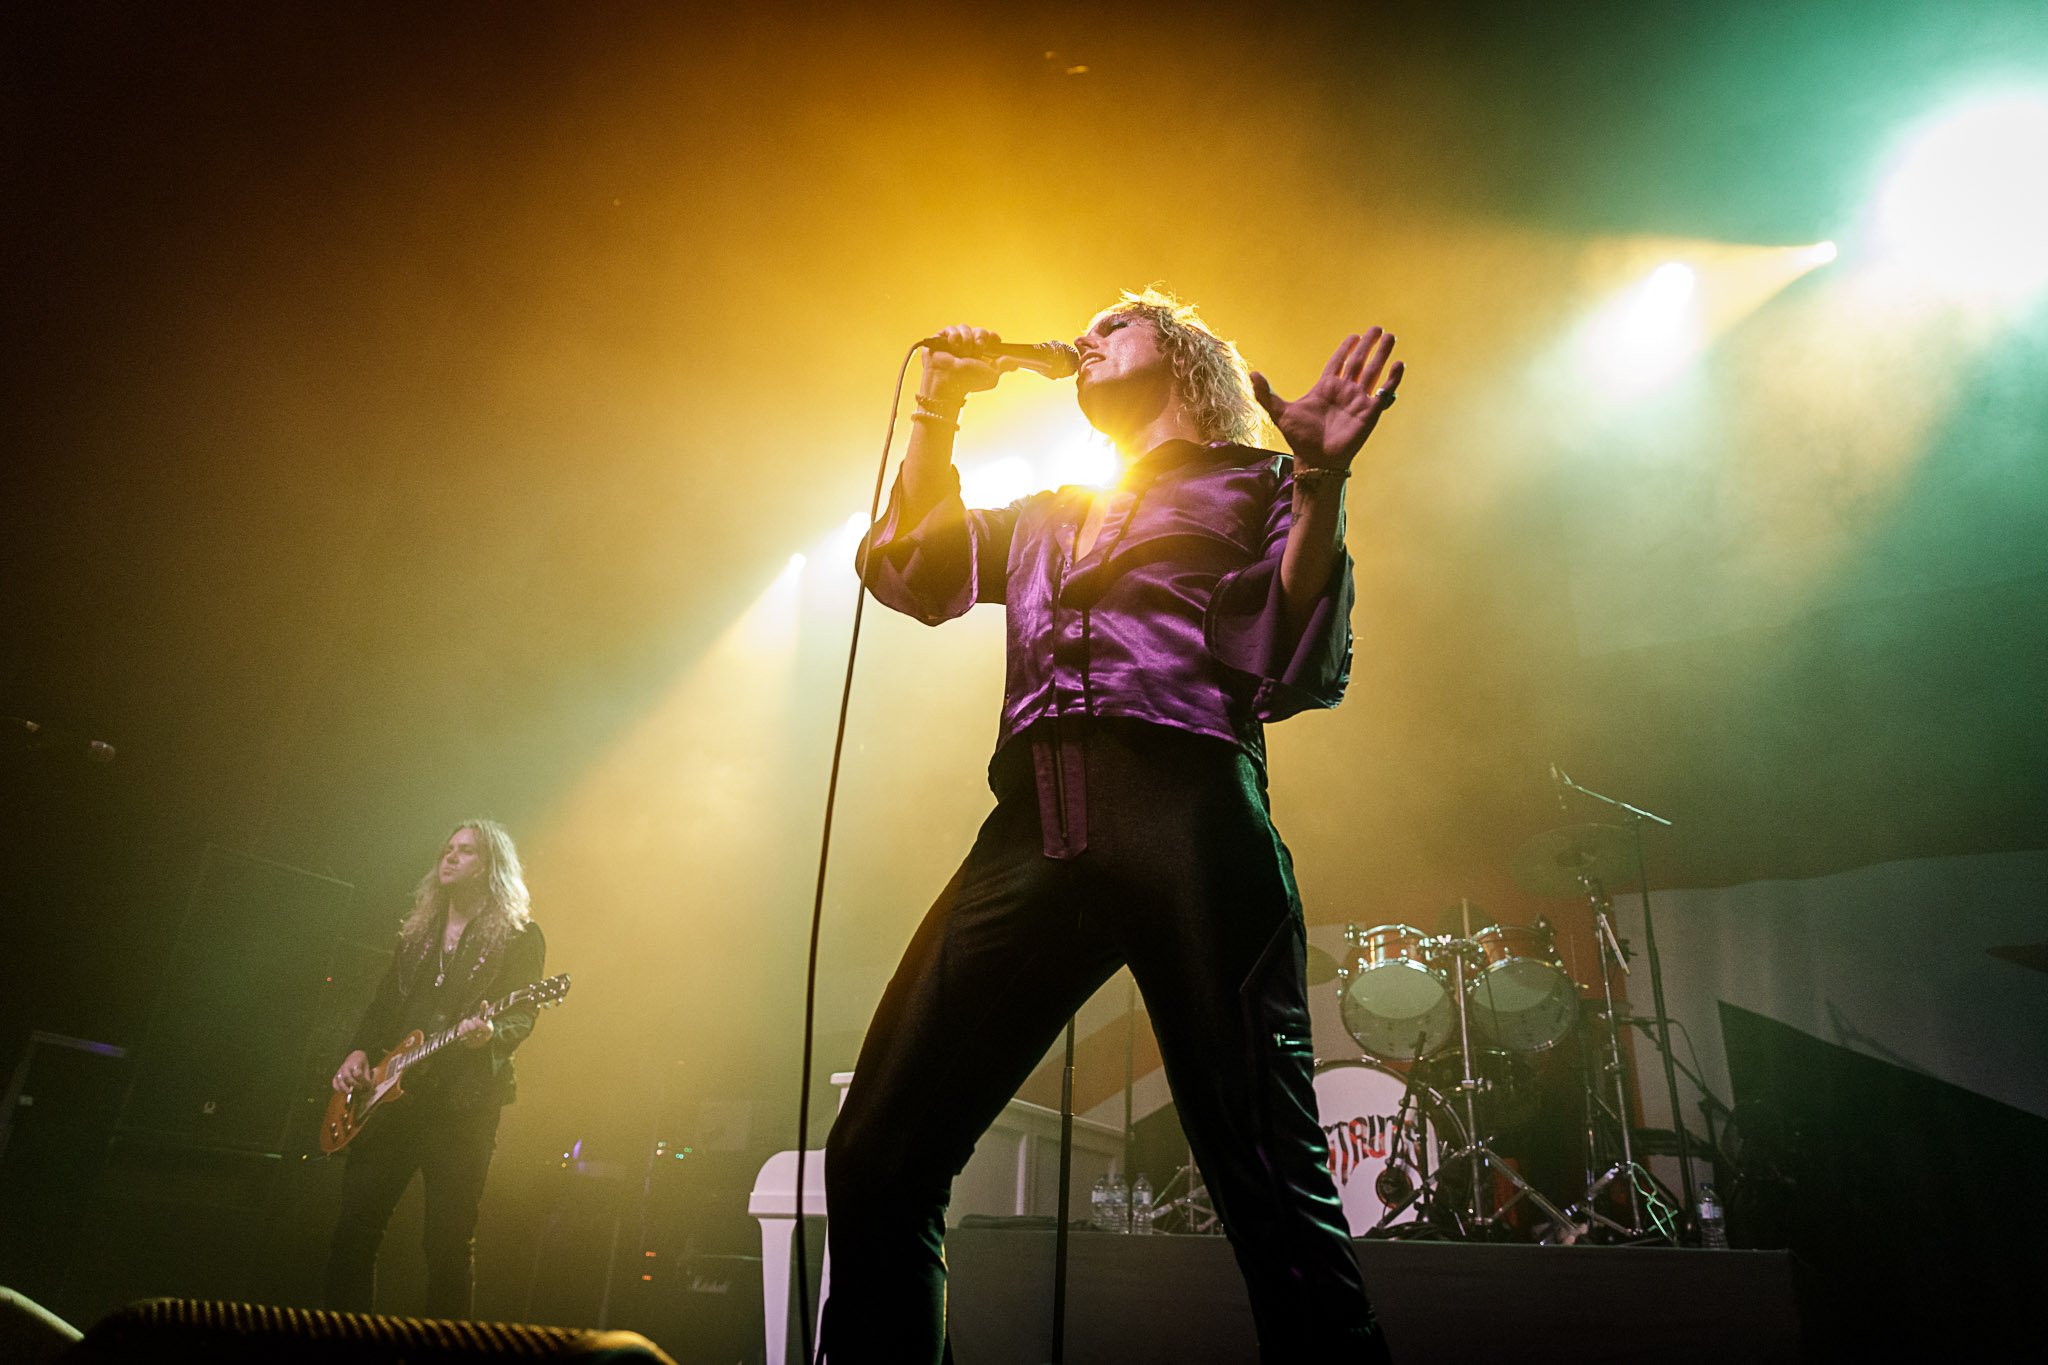 The Struts at the O2 Ritz in Manchester on July 19th 2022 ©Joha